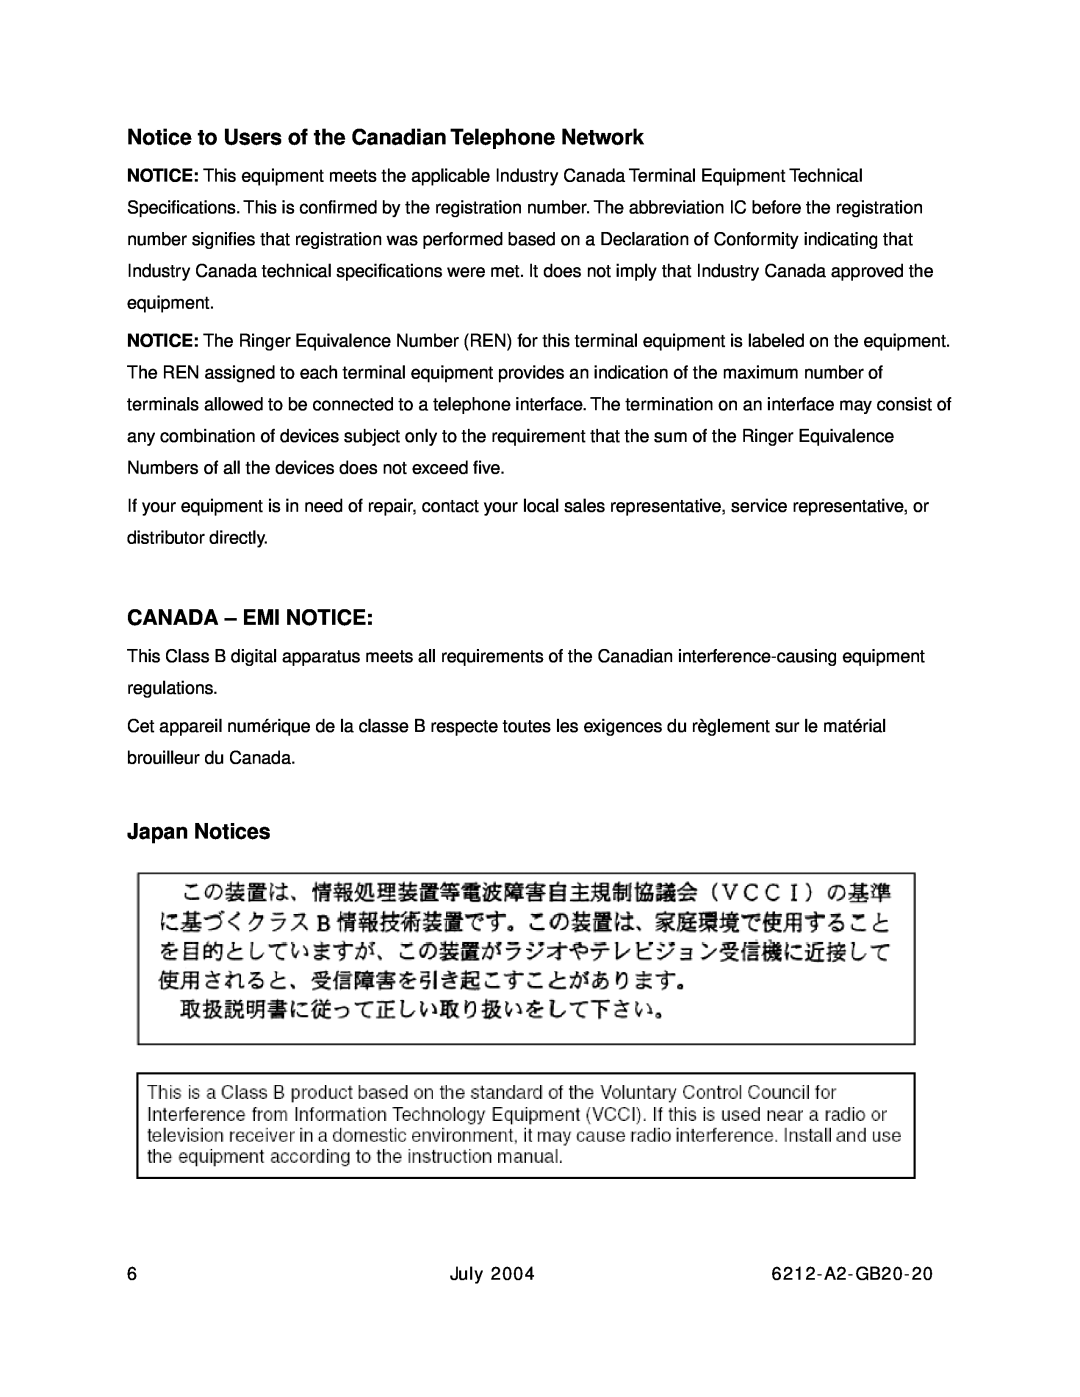 Paradyne 6212 manual Notice to Users of the Canadian Telephone Network, Canada - Emi Notice, Japan Notices 